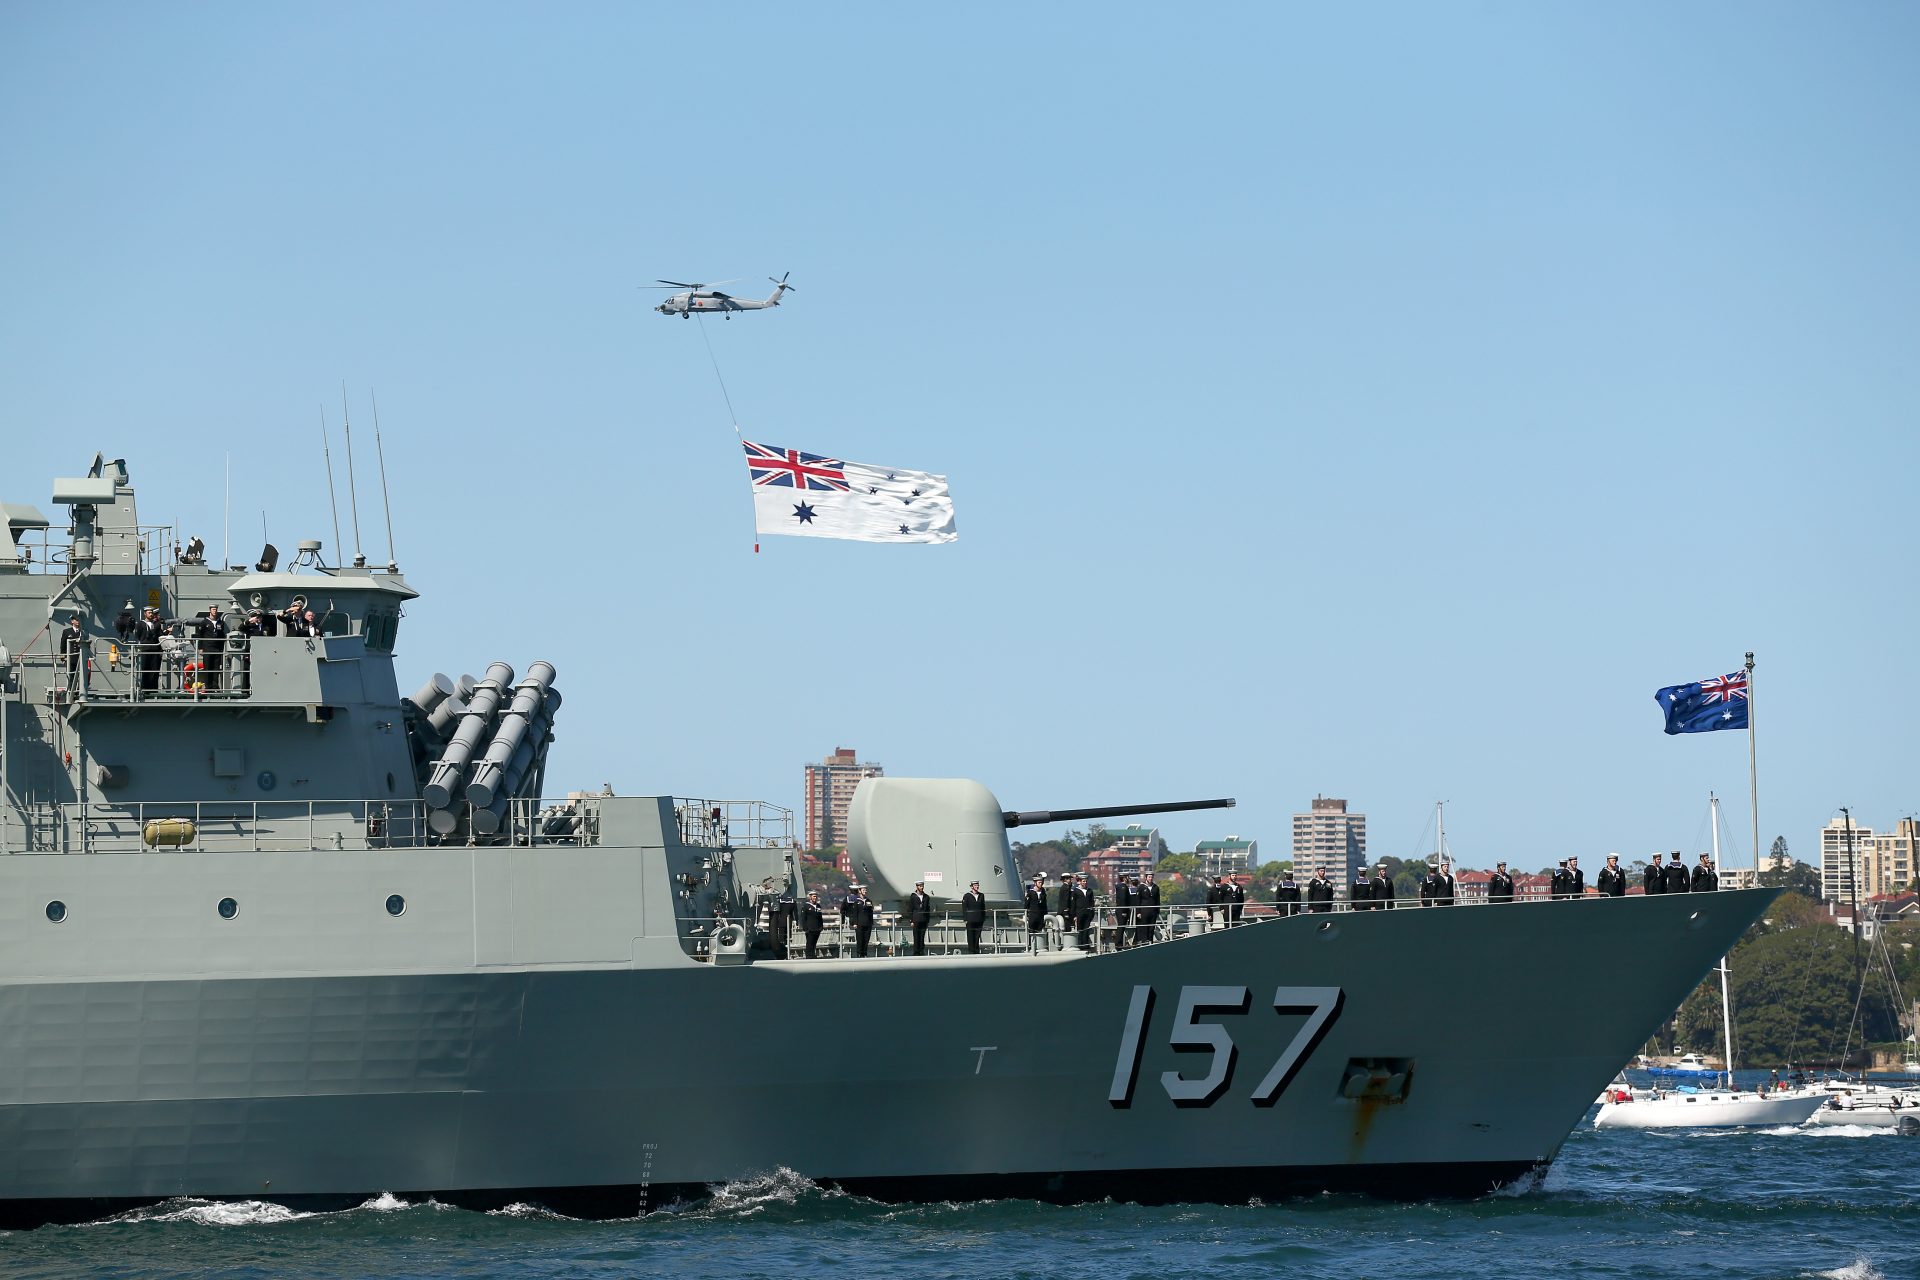 Australia is going to invest heavily in its navy